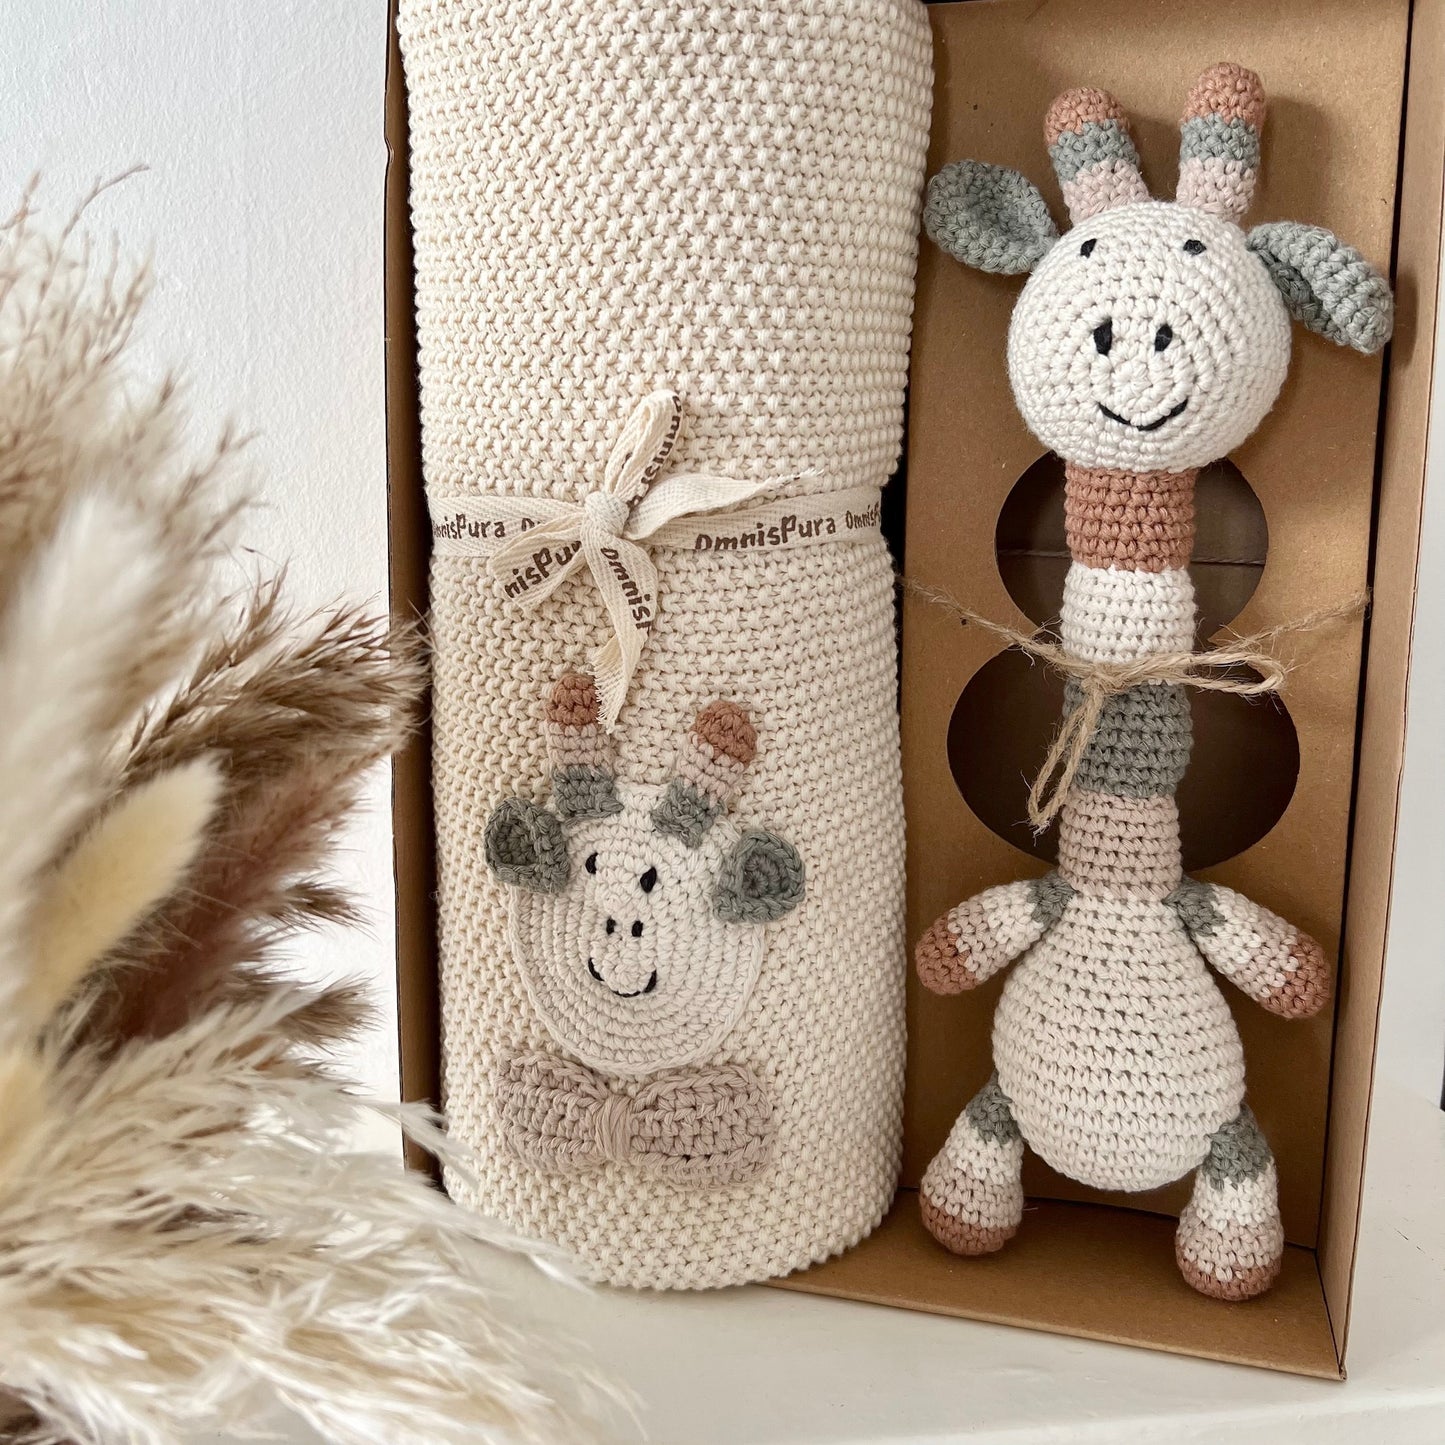 Organic Embroidered Blanket and Crochet Toy - Giraffe